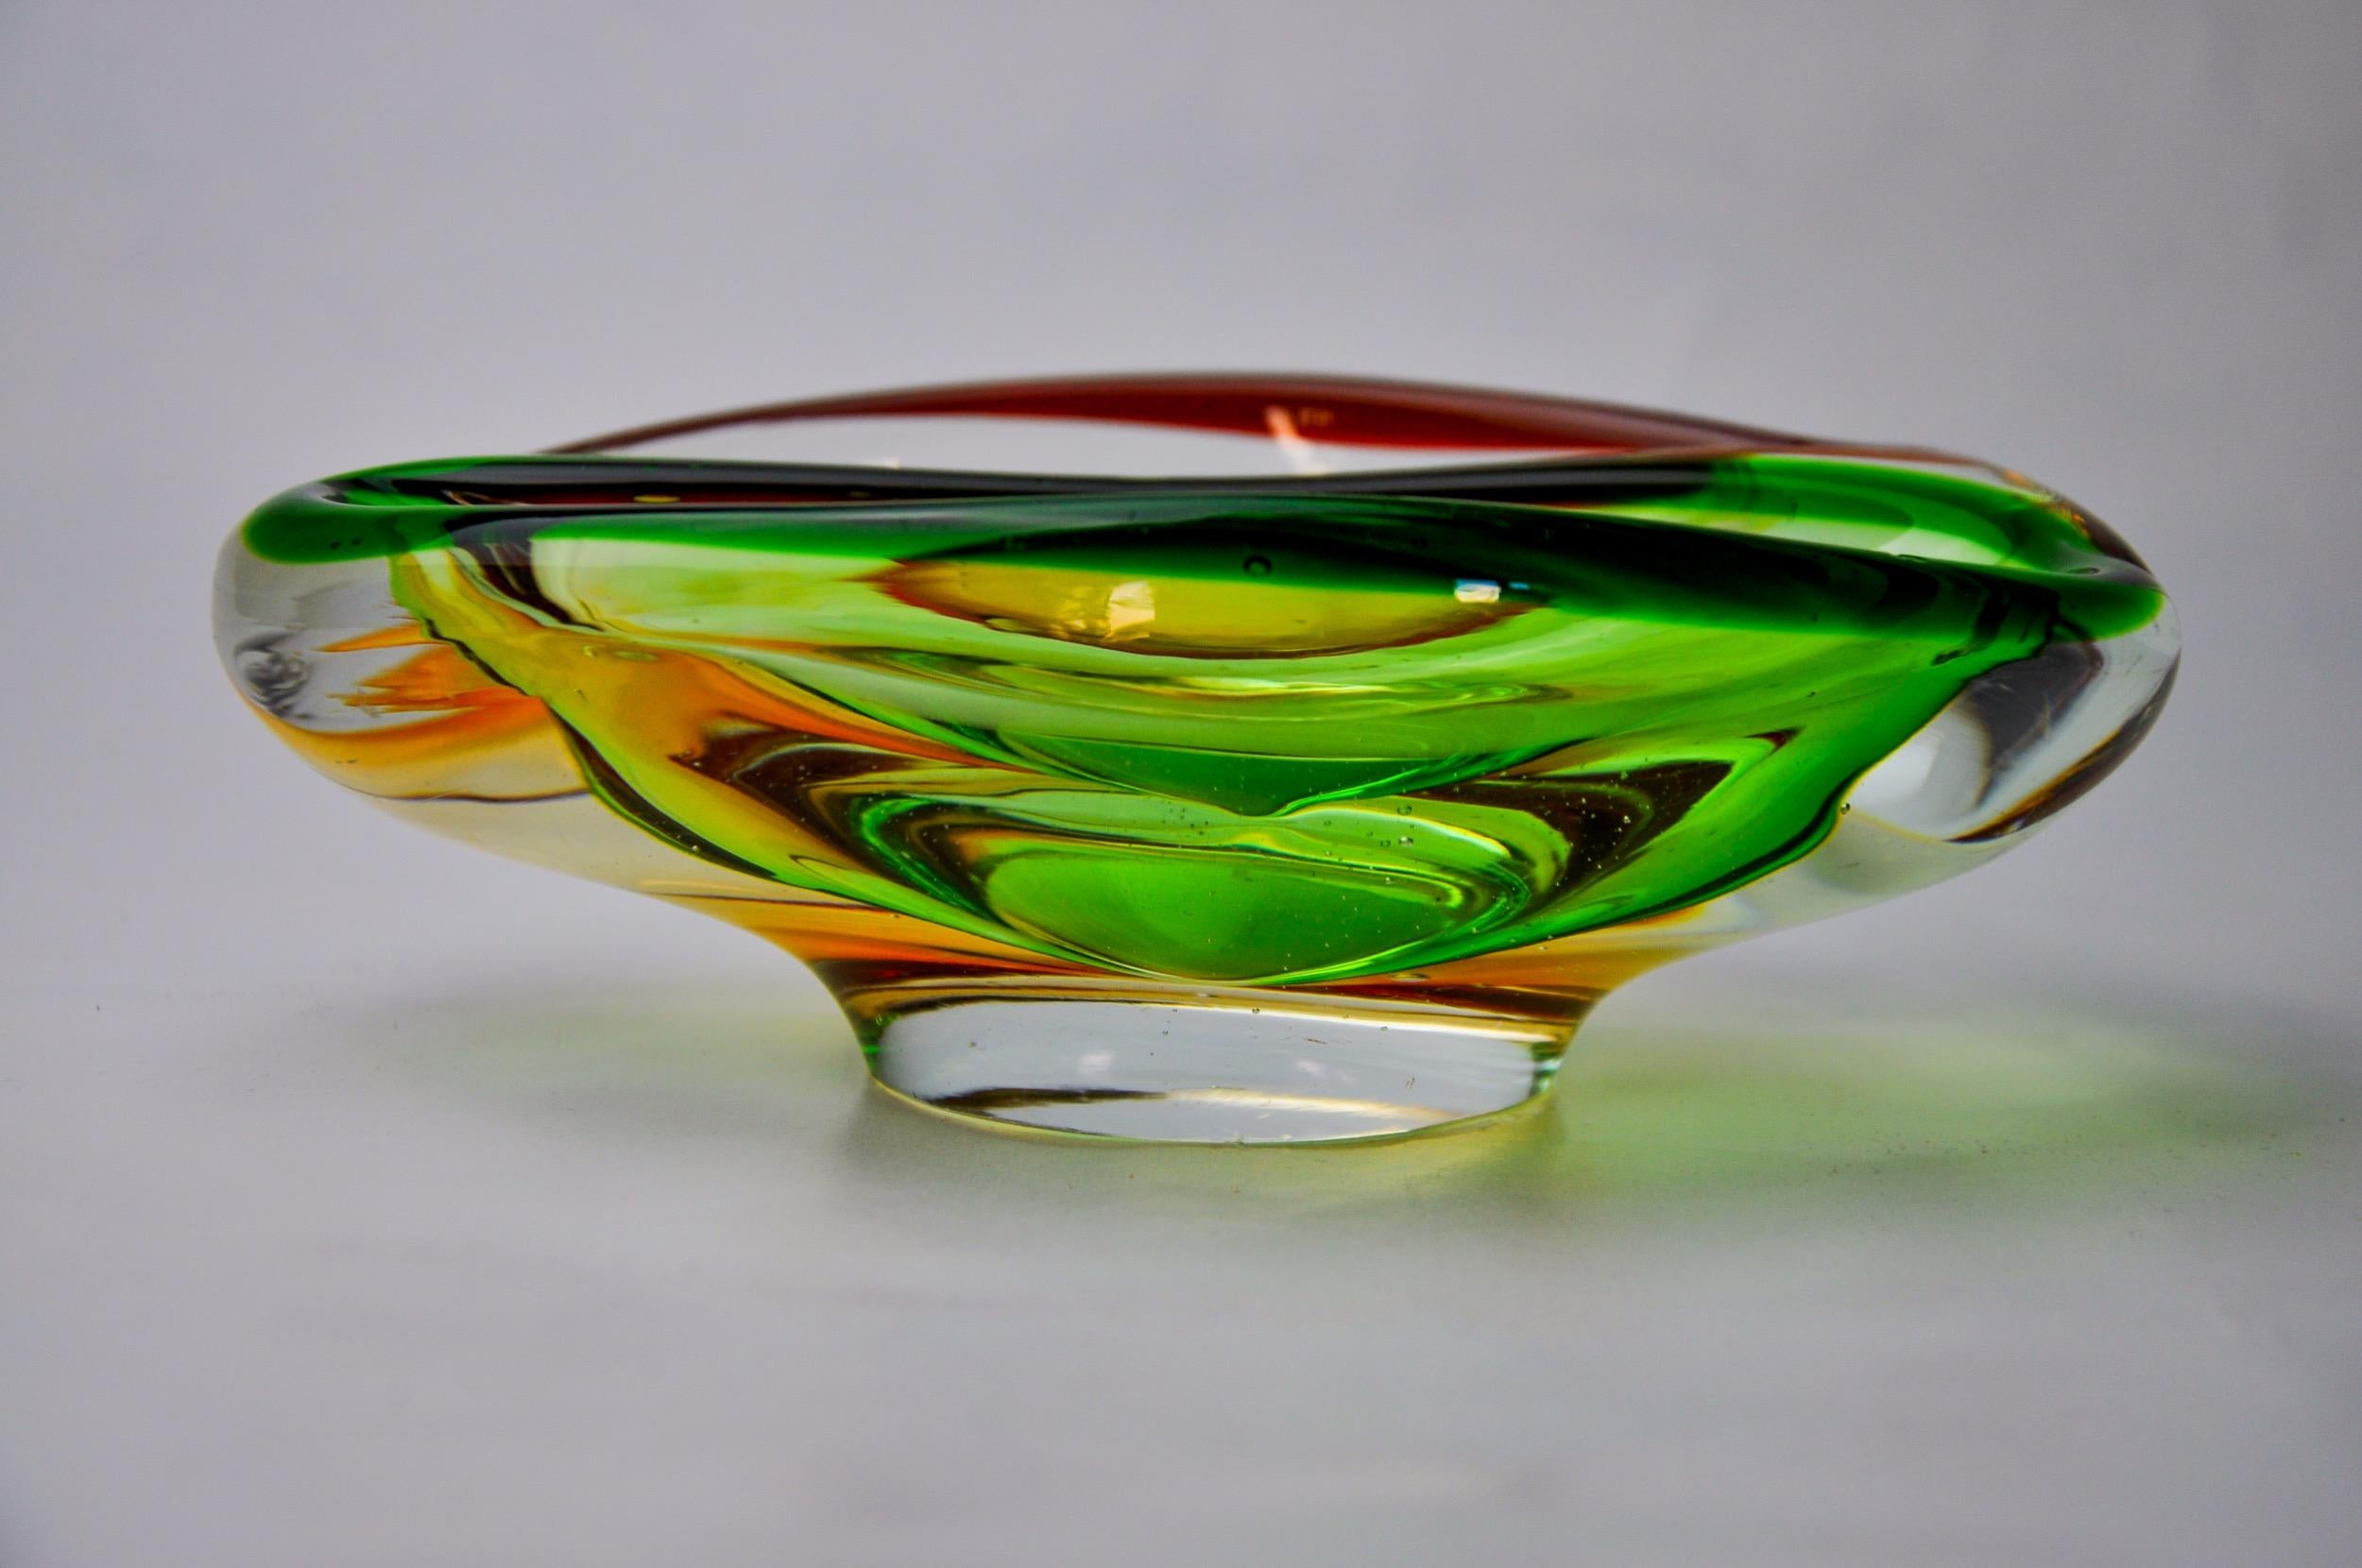 Superb and rare two-tone orange and green ashtray made for Seguso in Murano in the 1970s. Handcrafted glass using the 